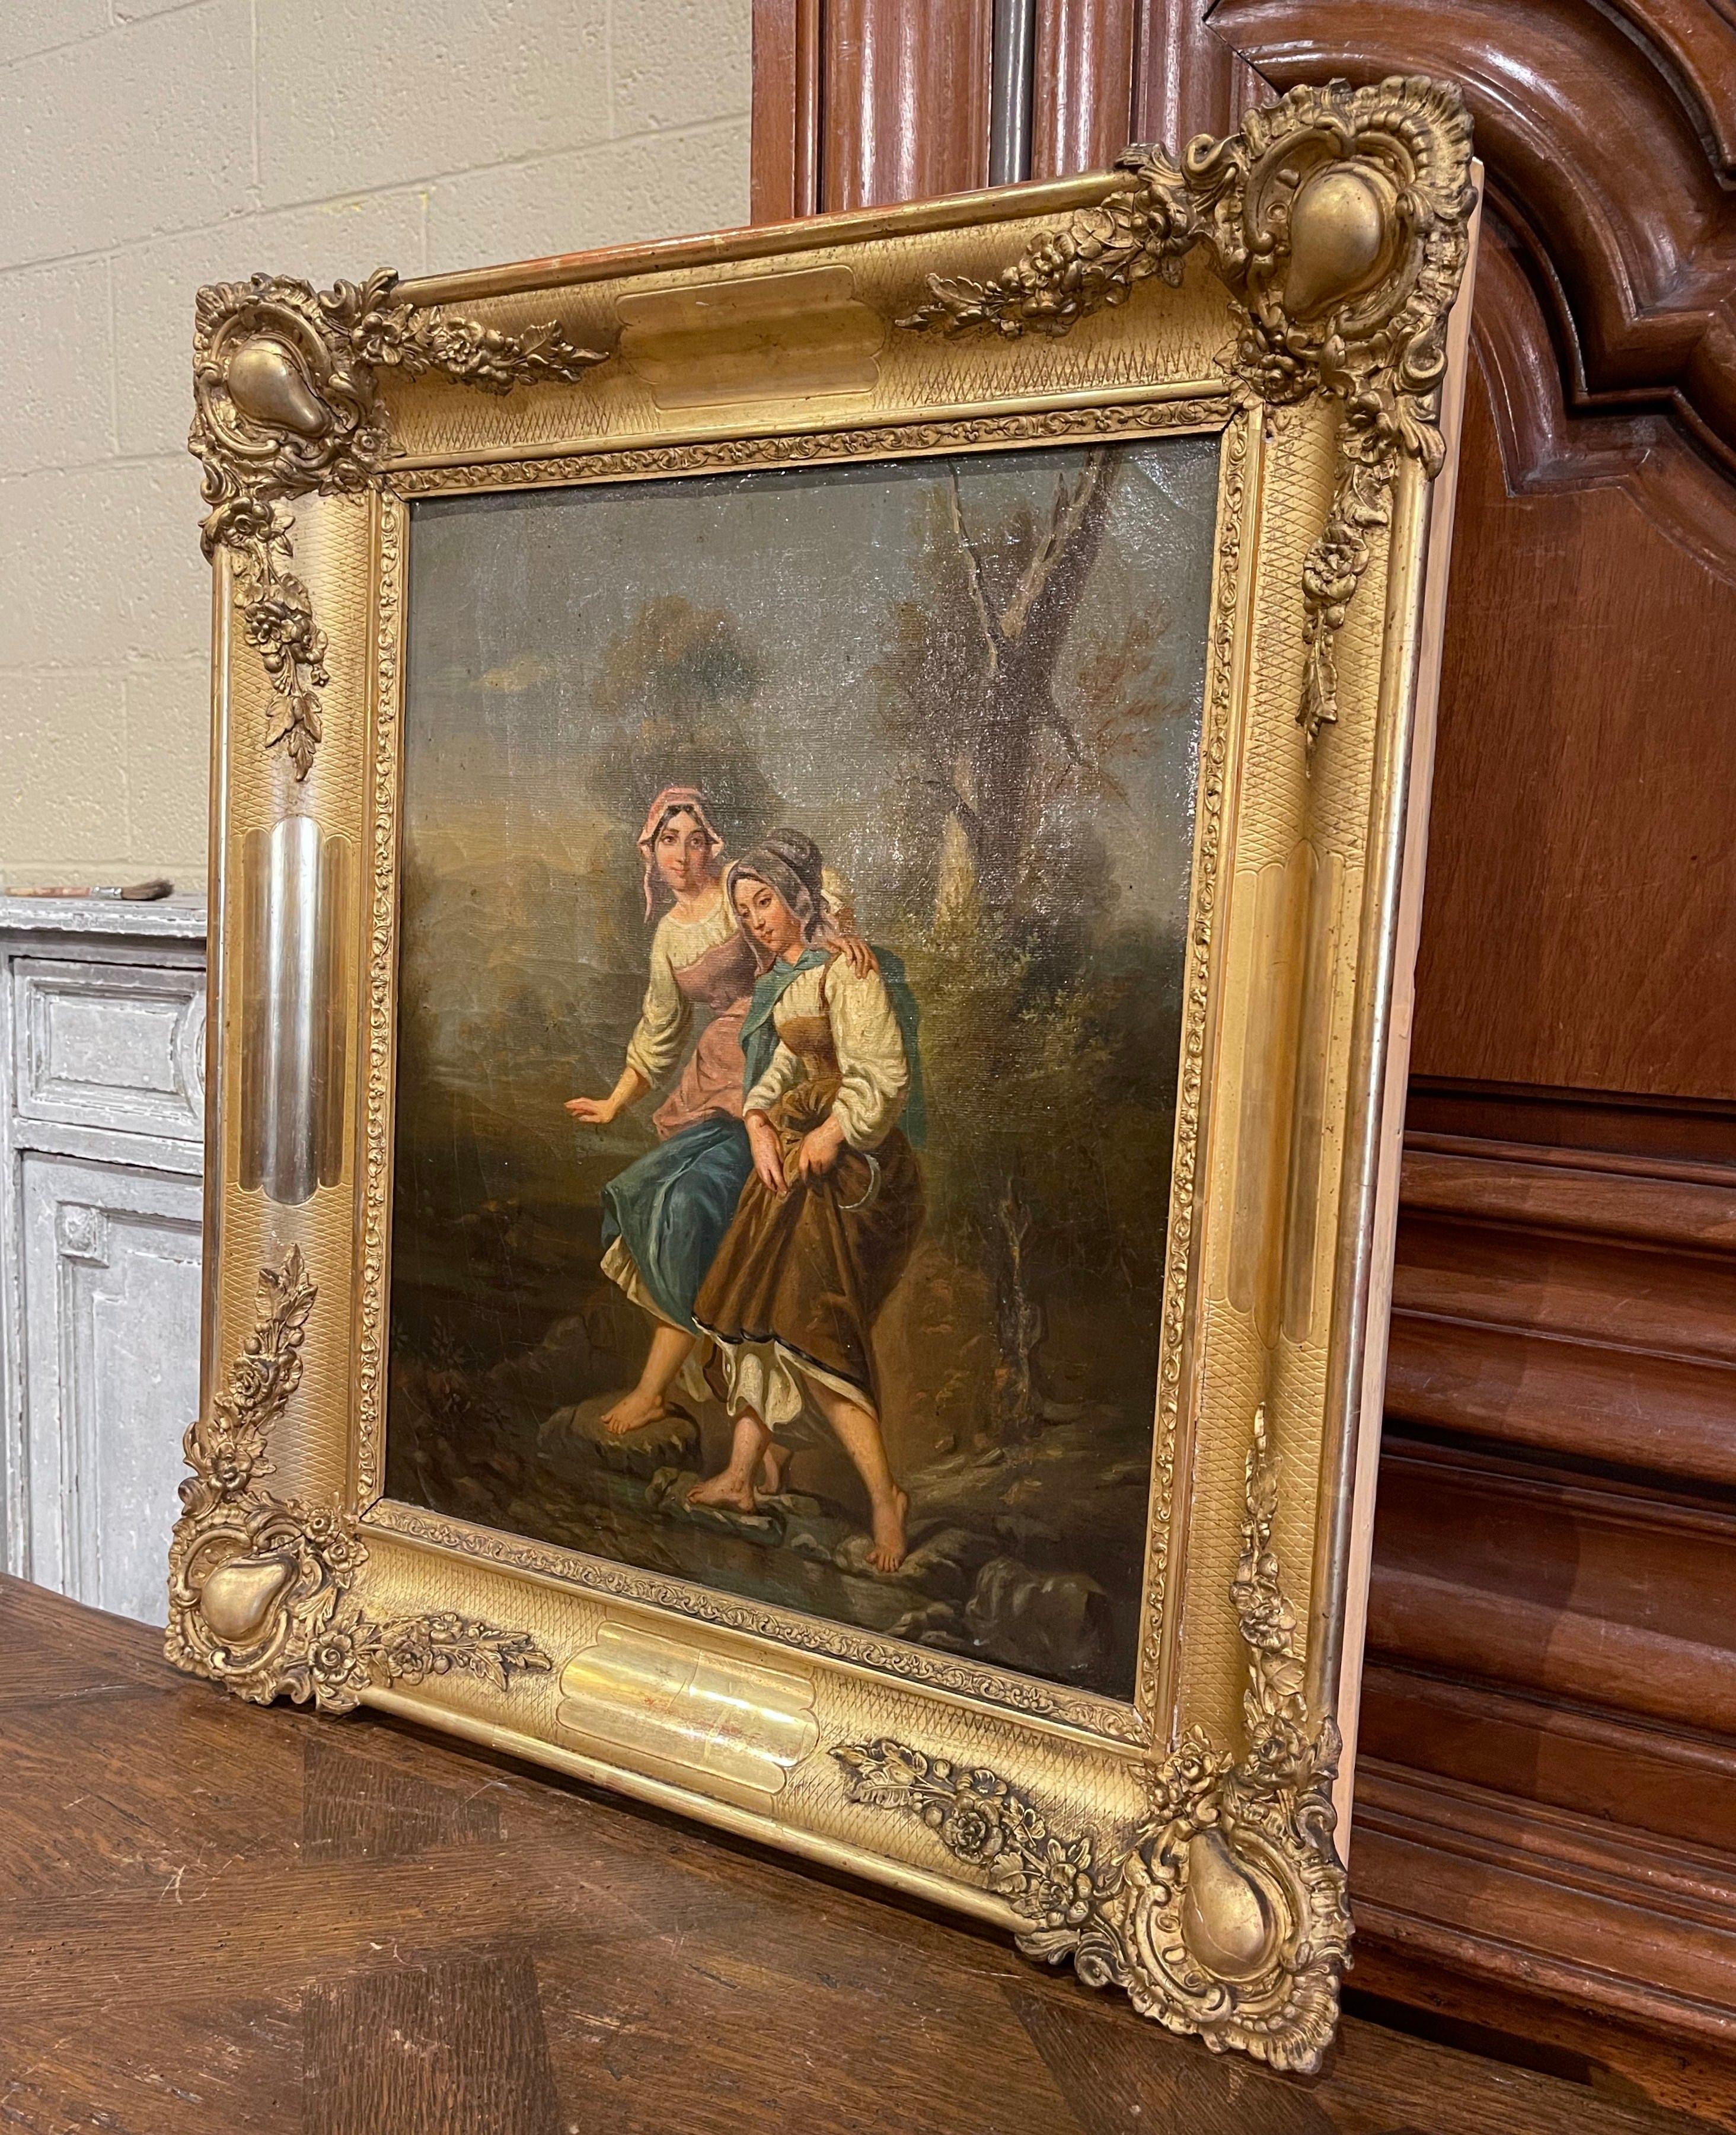 This elegant antique painting was created in France circa 1830. Set in the original carved gilt wood frame, the hand painted canvas depicts two young beauties strolling bare foot on rocky ground with pastoral surroundings; wonderful facial